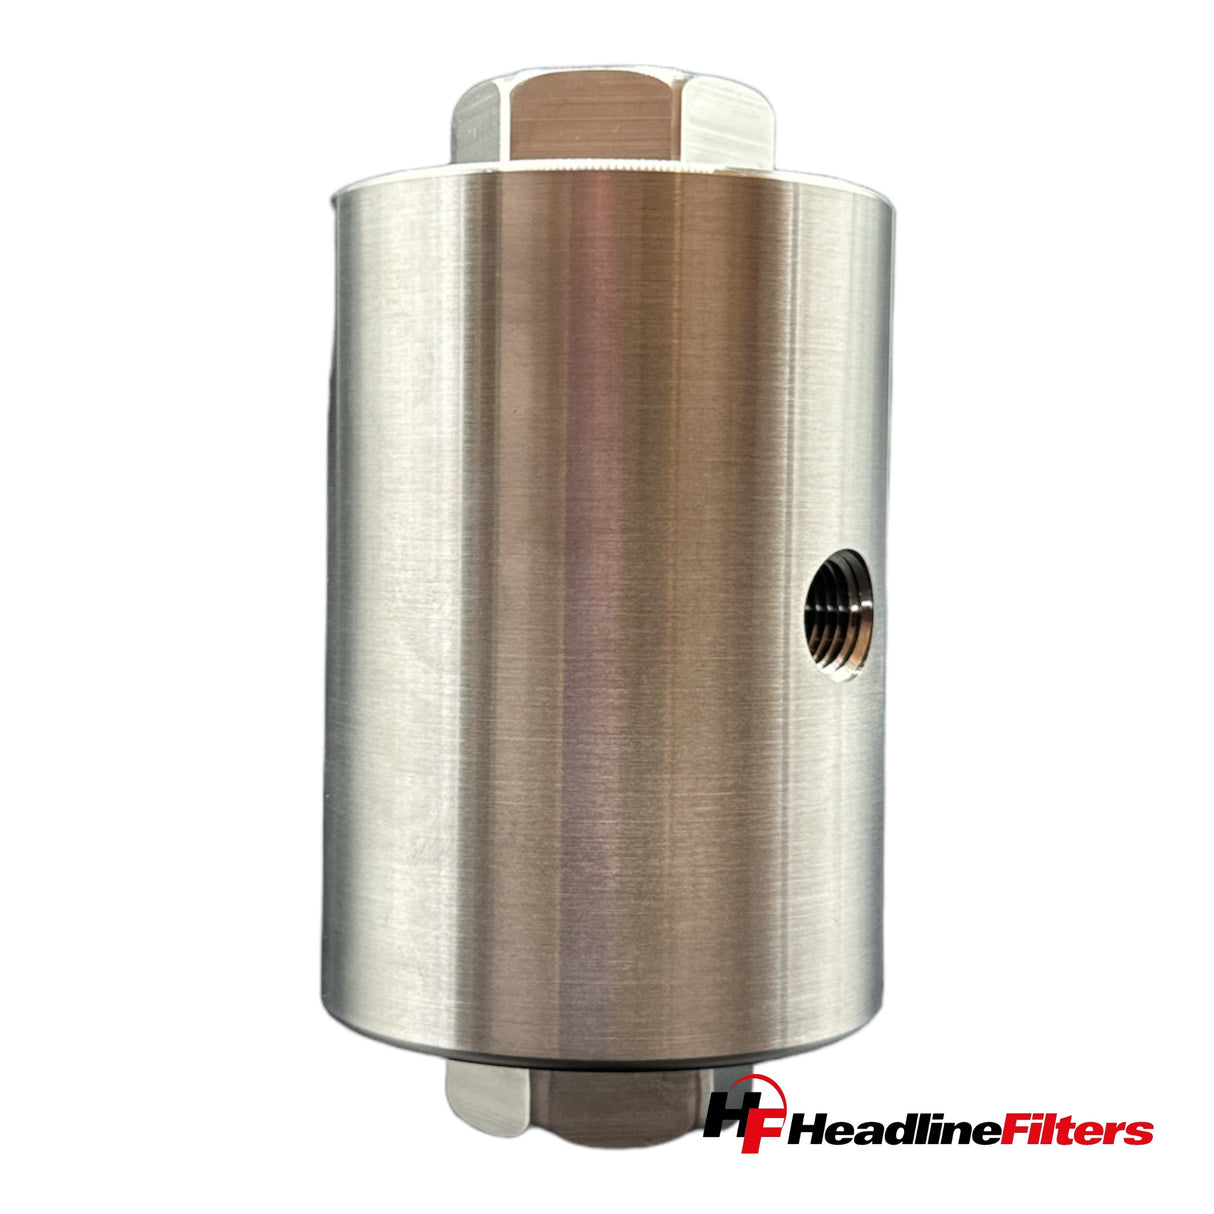 Stainless Steel Filter Housing - Model 136IL-3